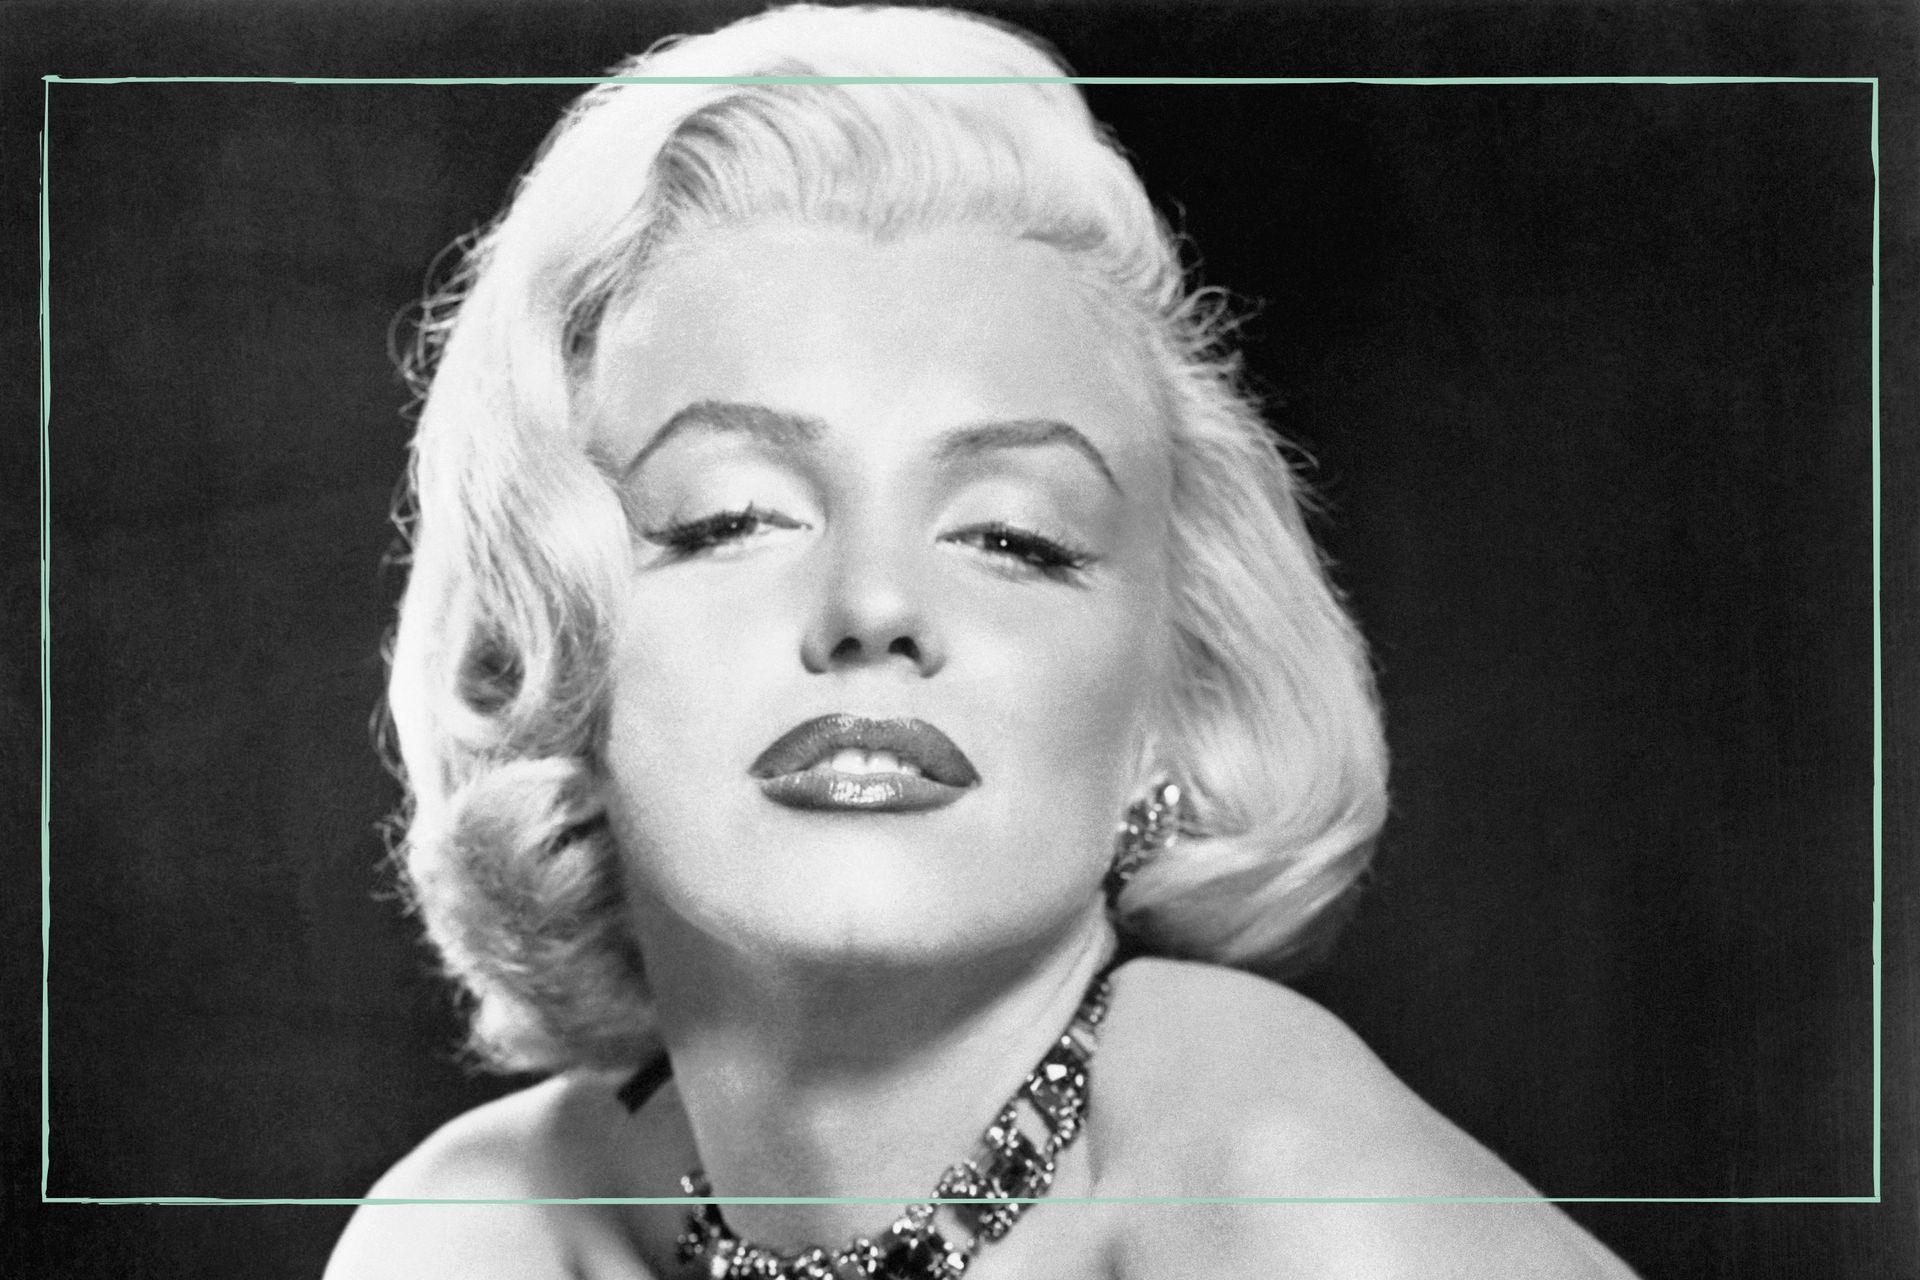 How old would Marilyn Monroe be today and how old was she when she died